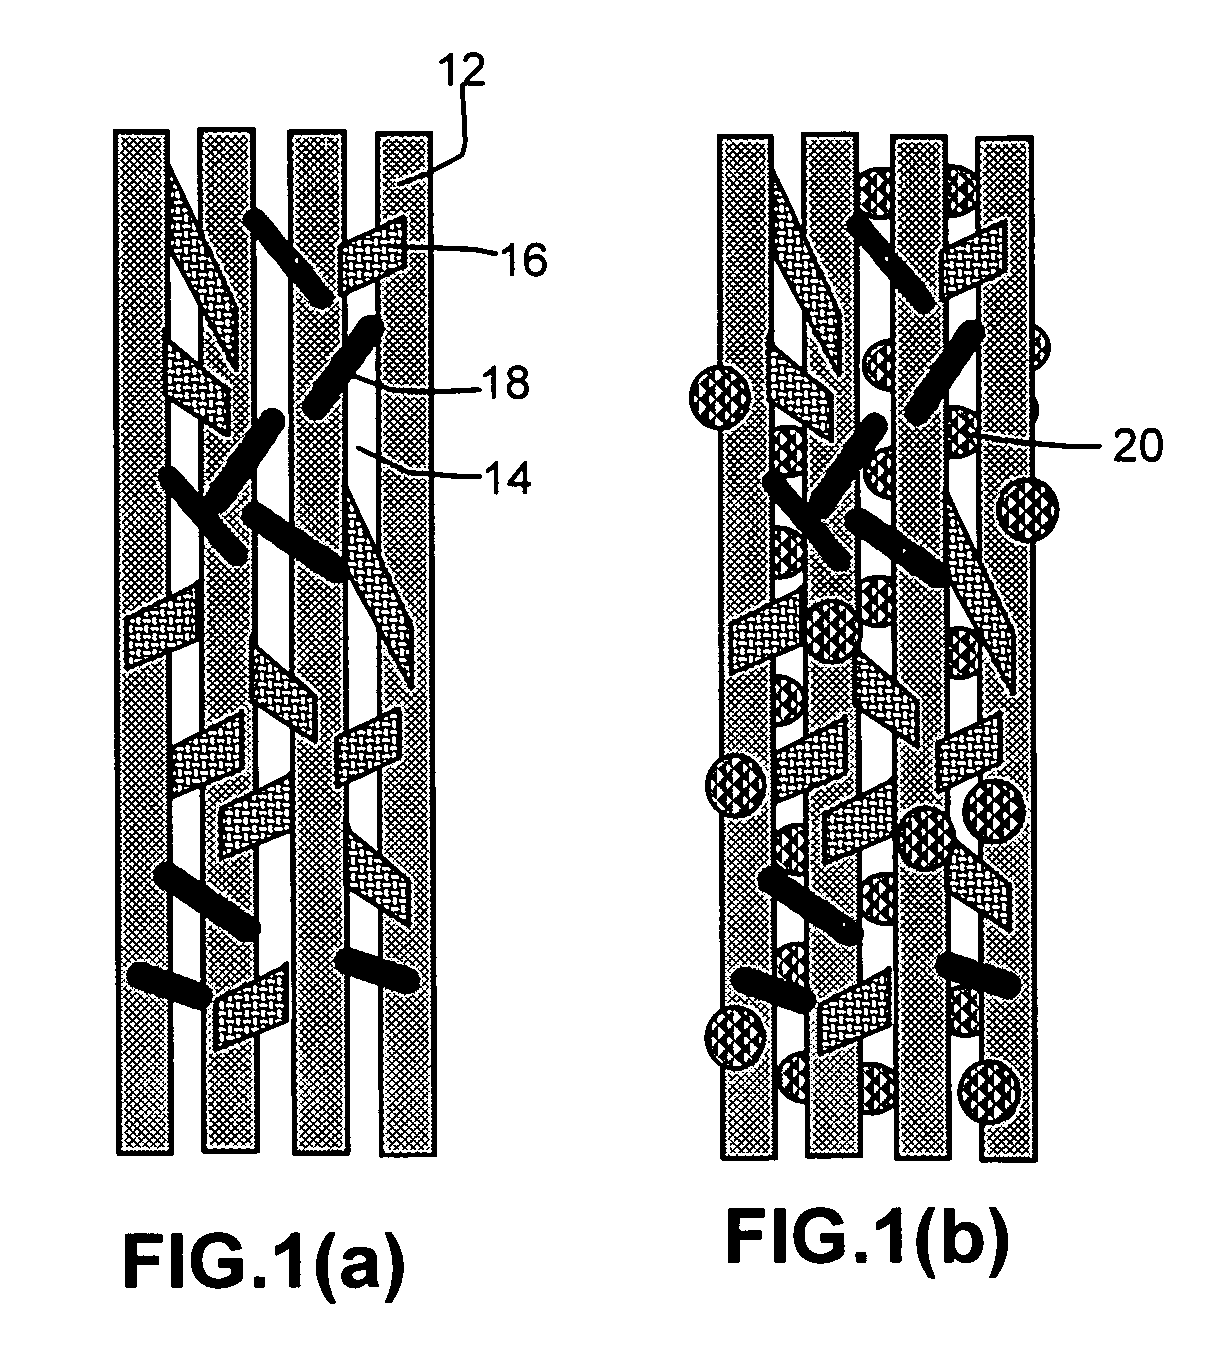 Hybrid fiber tows containning both nano-fillers and continuous fibers, hybrid composites, and their production processes